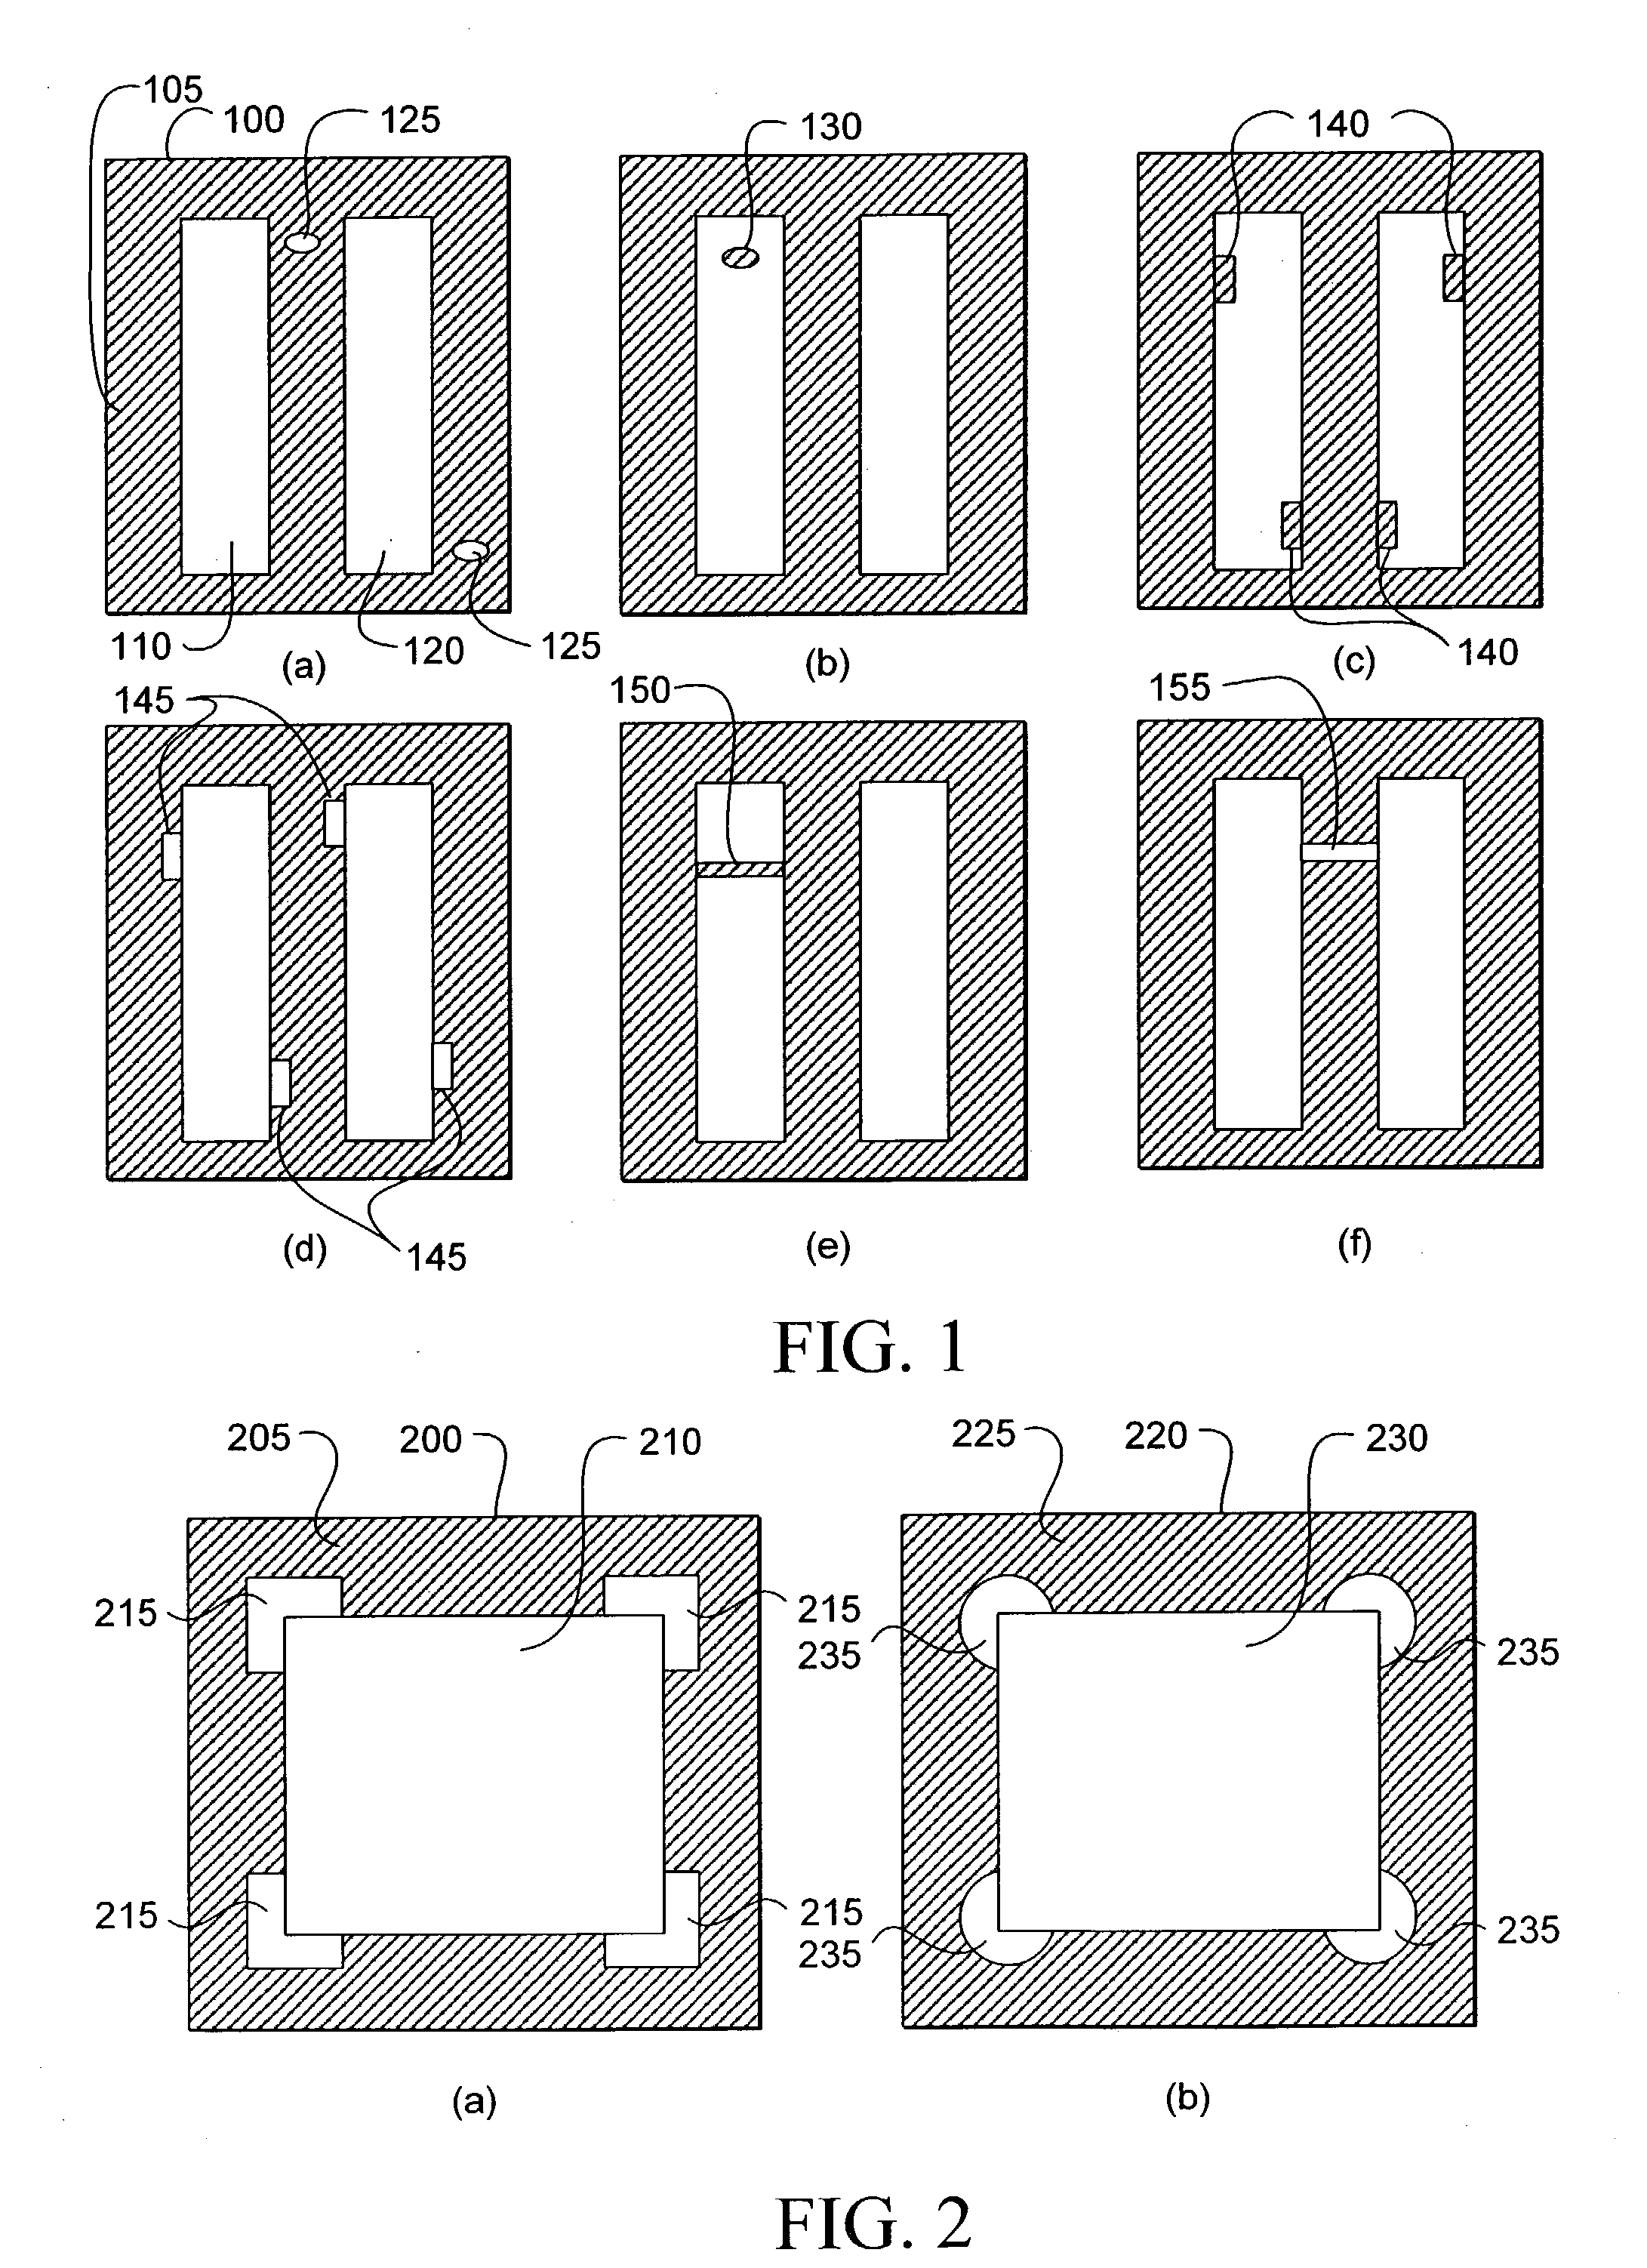 User interface for a network-based mask defect printability analysis system